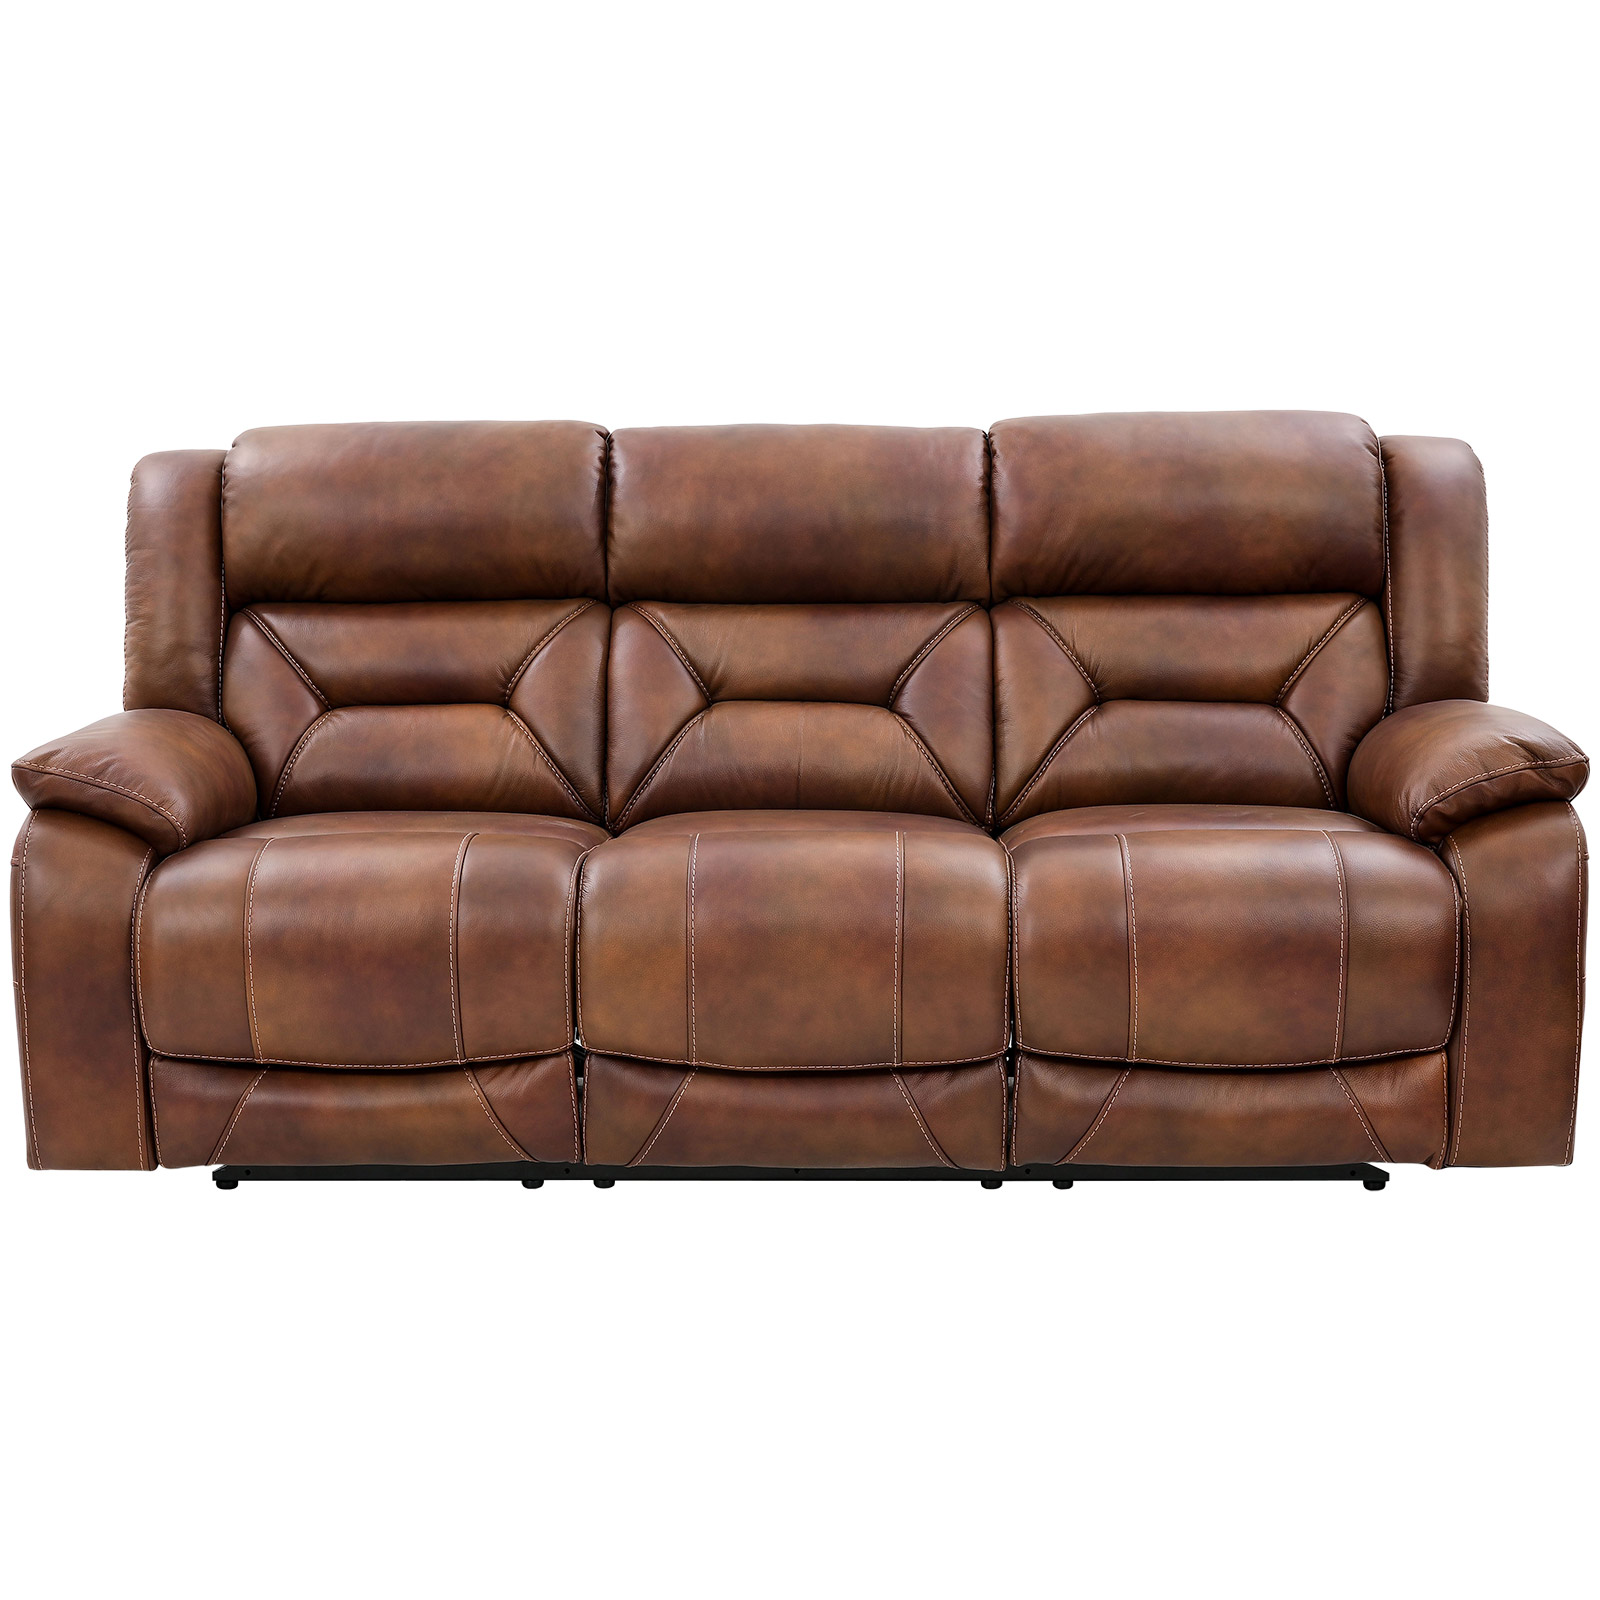 Cheers Roswell Brown Leather Power Reclining Sofa